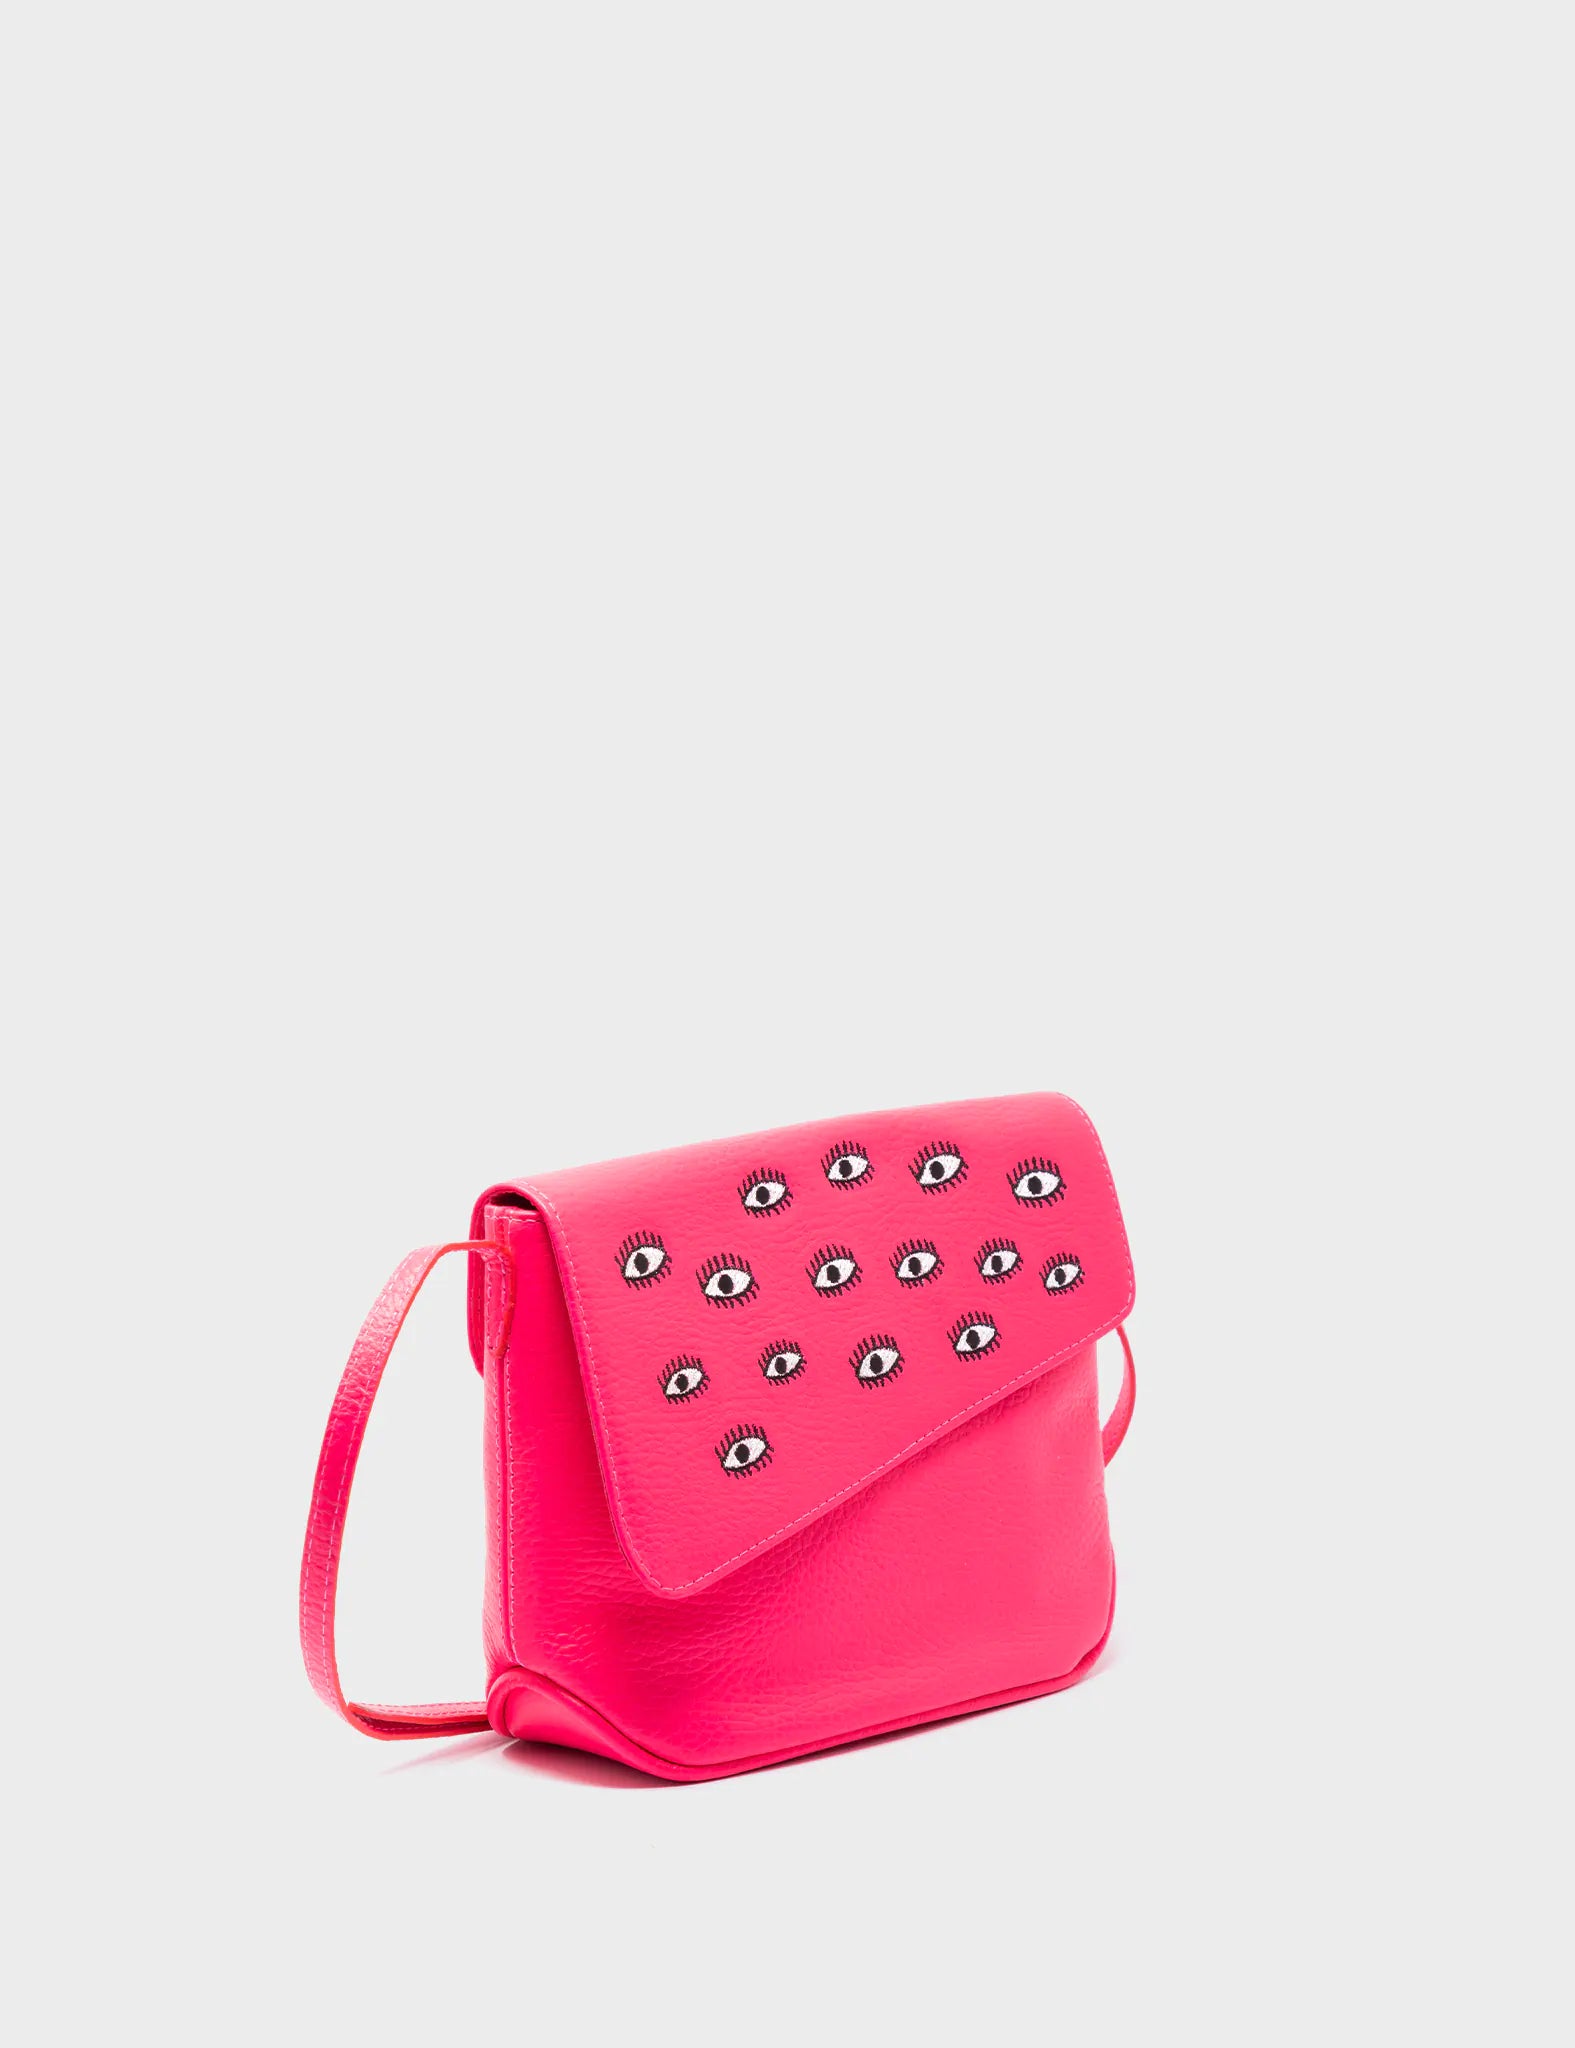 Bruno Mini Crossbody Neon Pink Leather Bag - All Over Eyes Embroidery - Main View